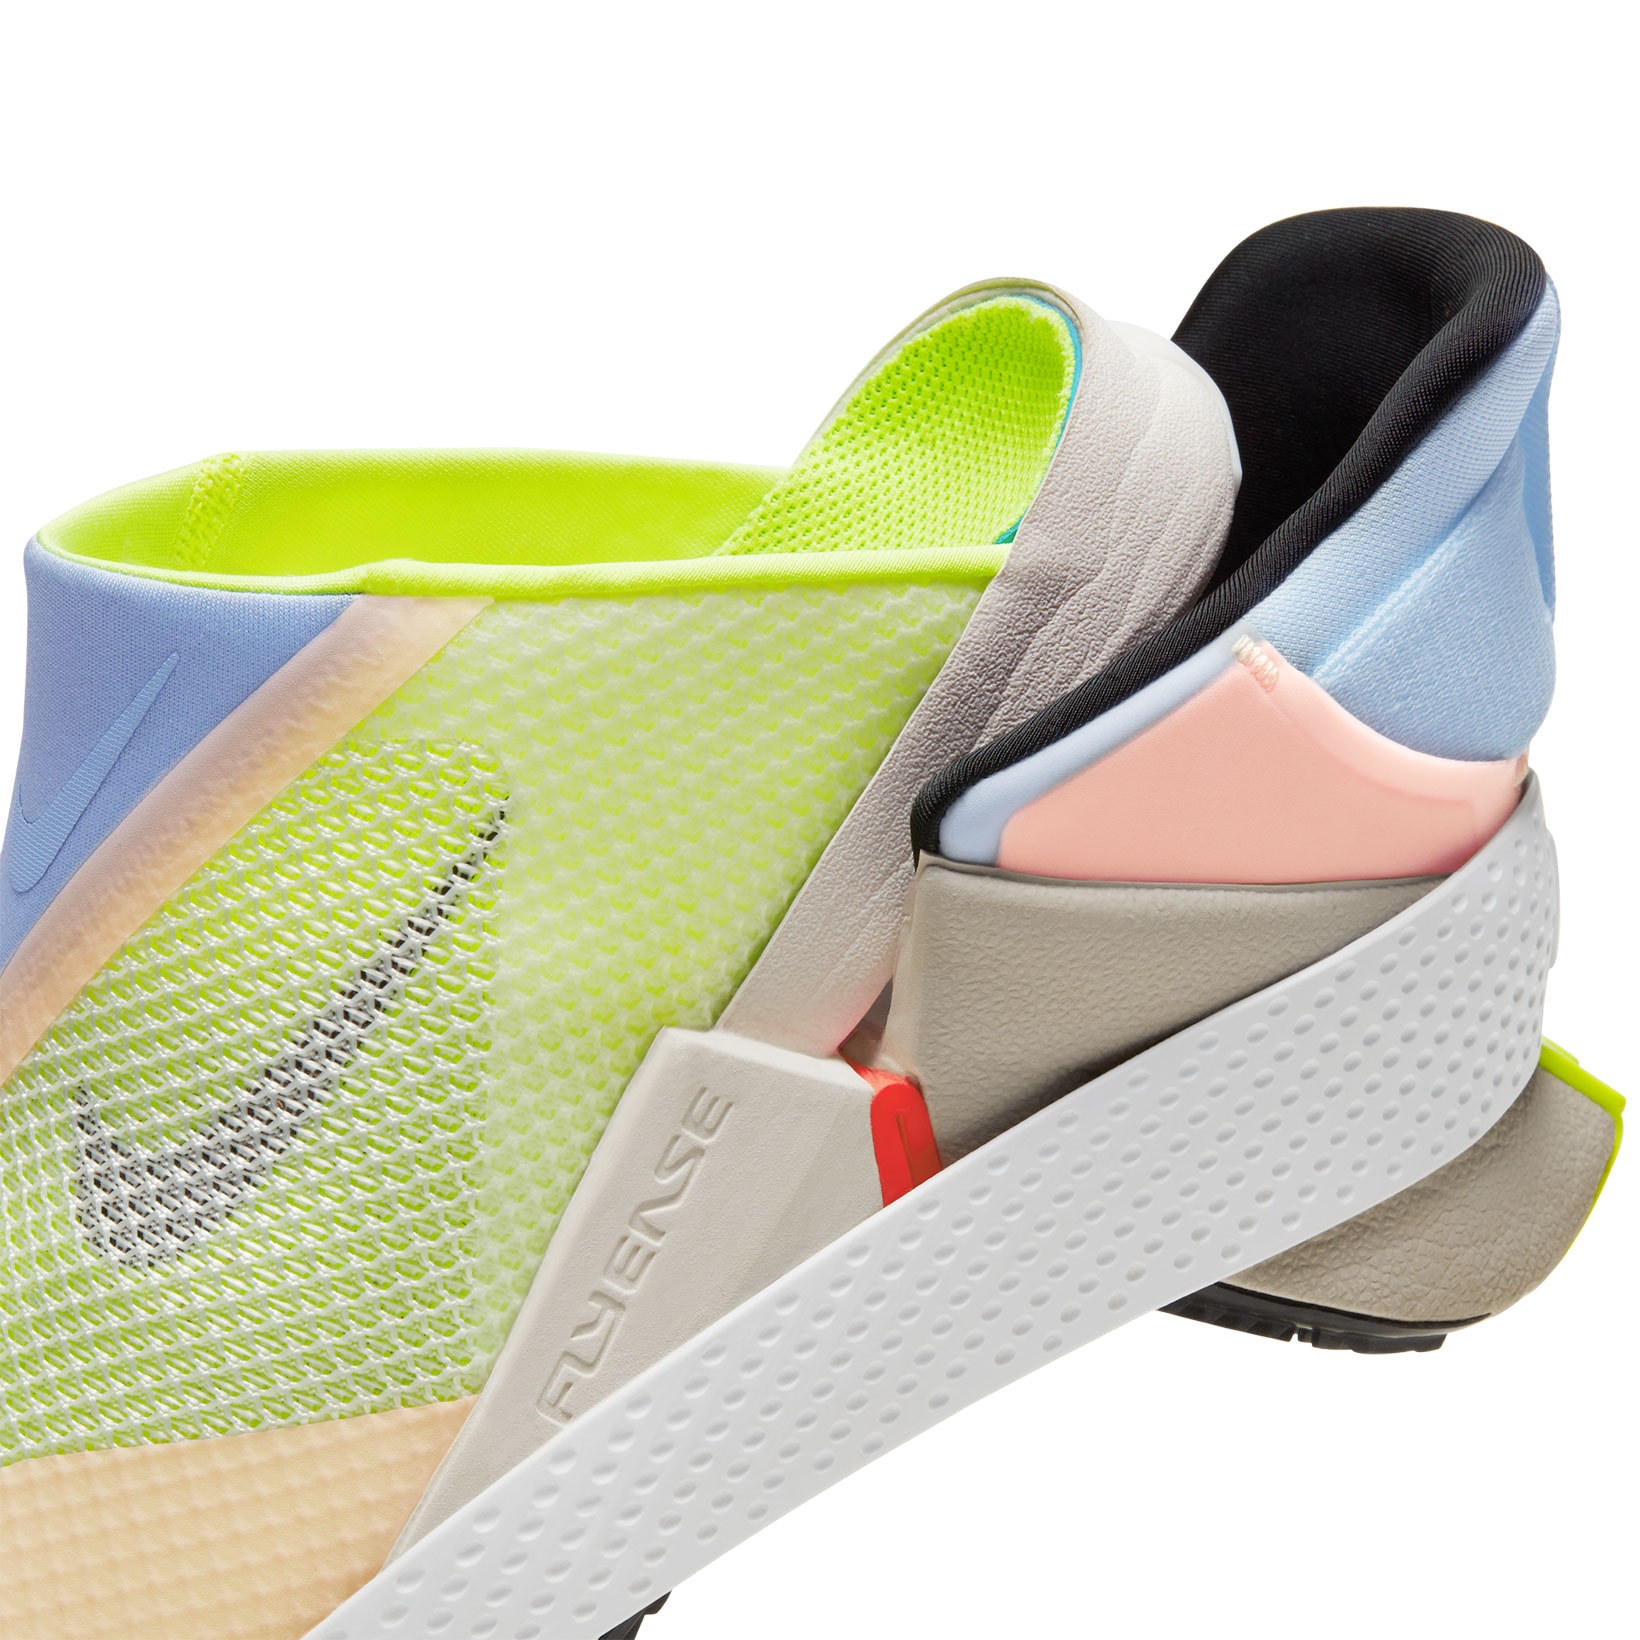 nike go flyease sneakers sneaker innovation technology design details neon volt yellow